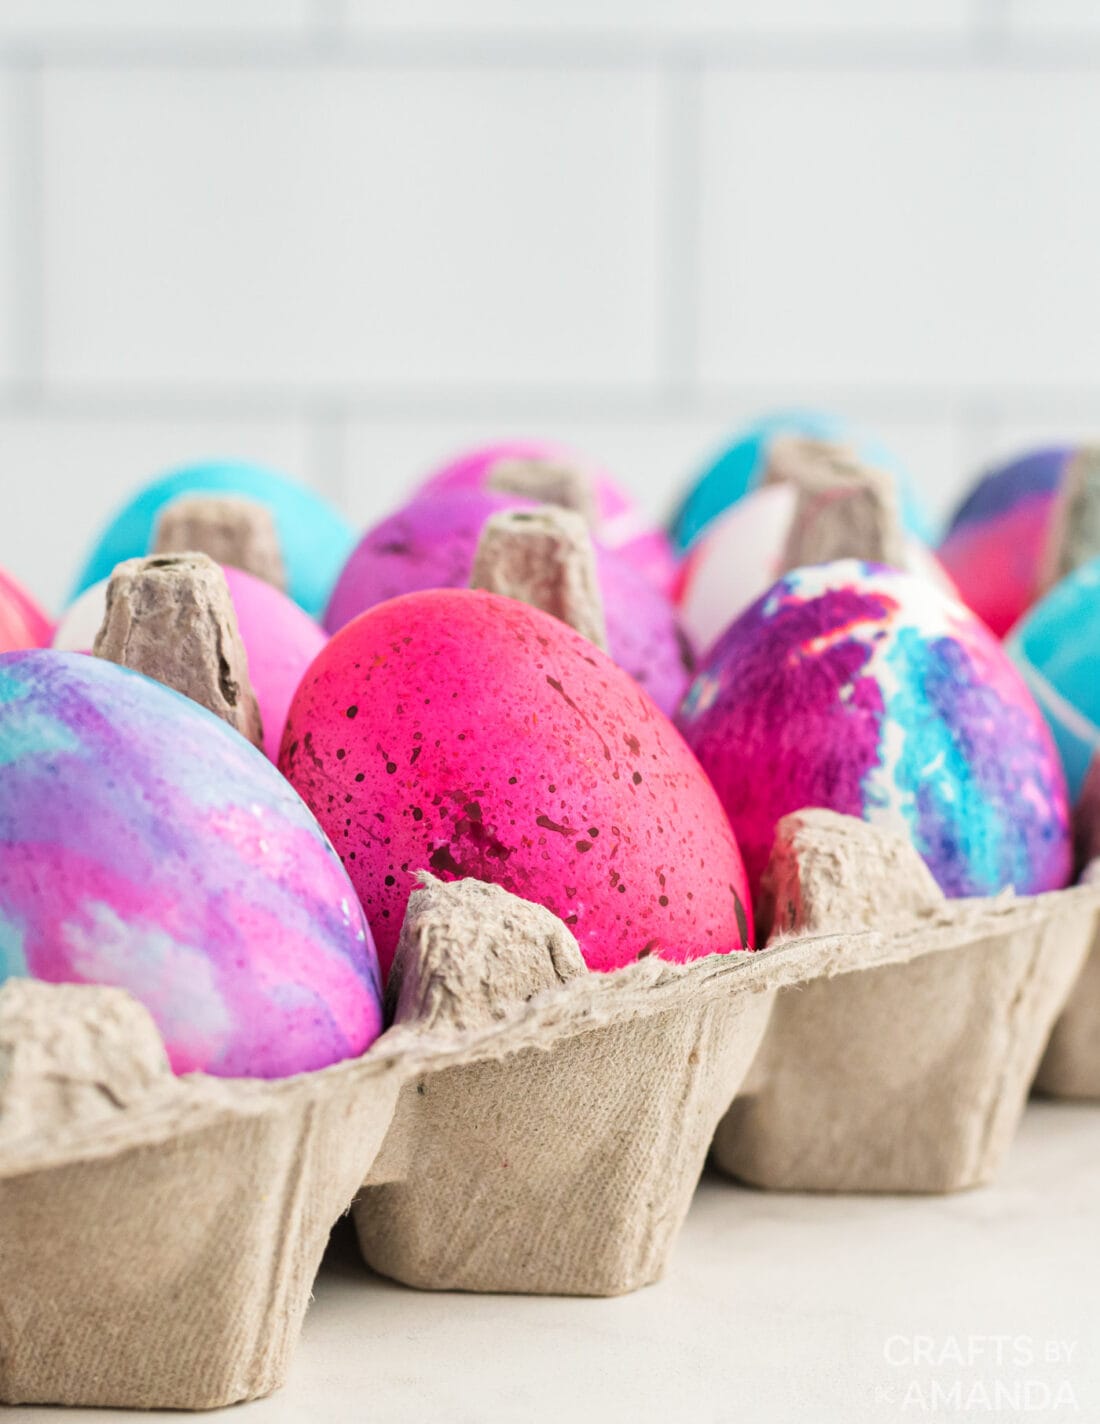 decorated easter eggs in an egg carton